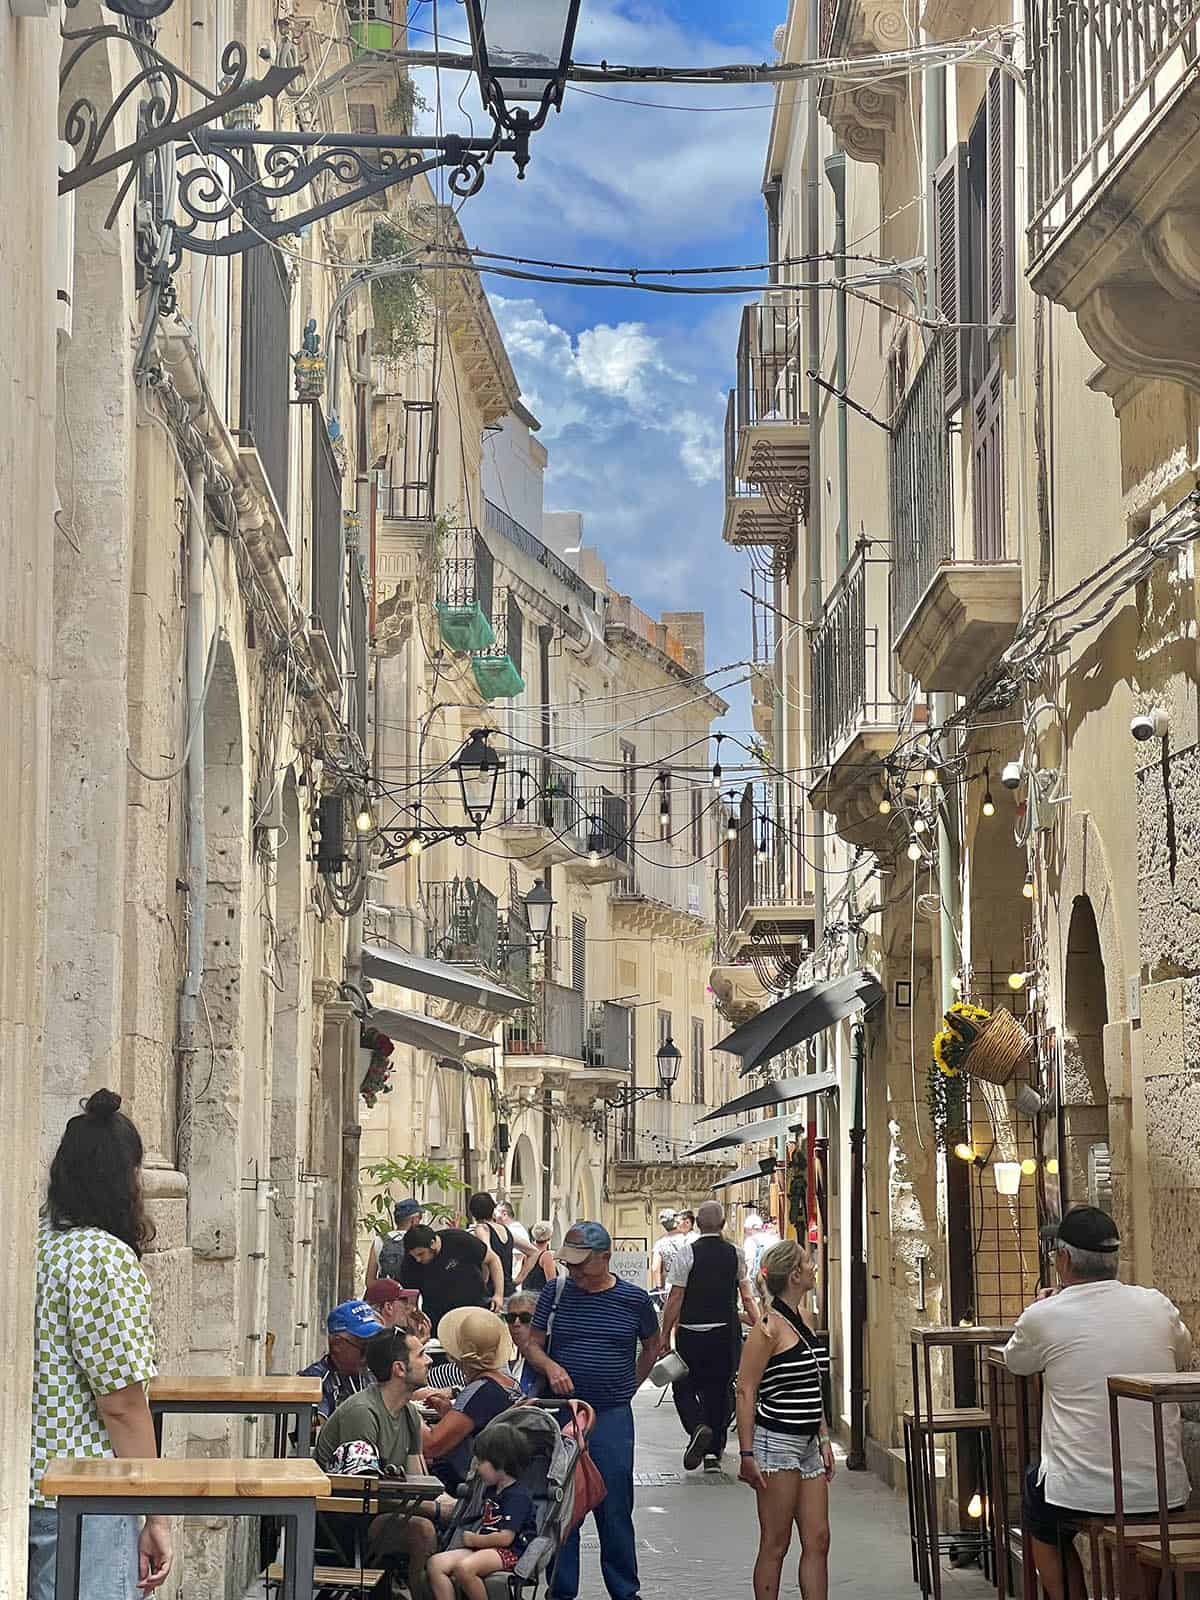 A streetscape in Ortigia, Sicily filled with people eating in restaurants and blue skies. Fairy lights and old lamps adorn the shops.